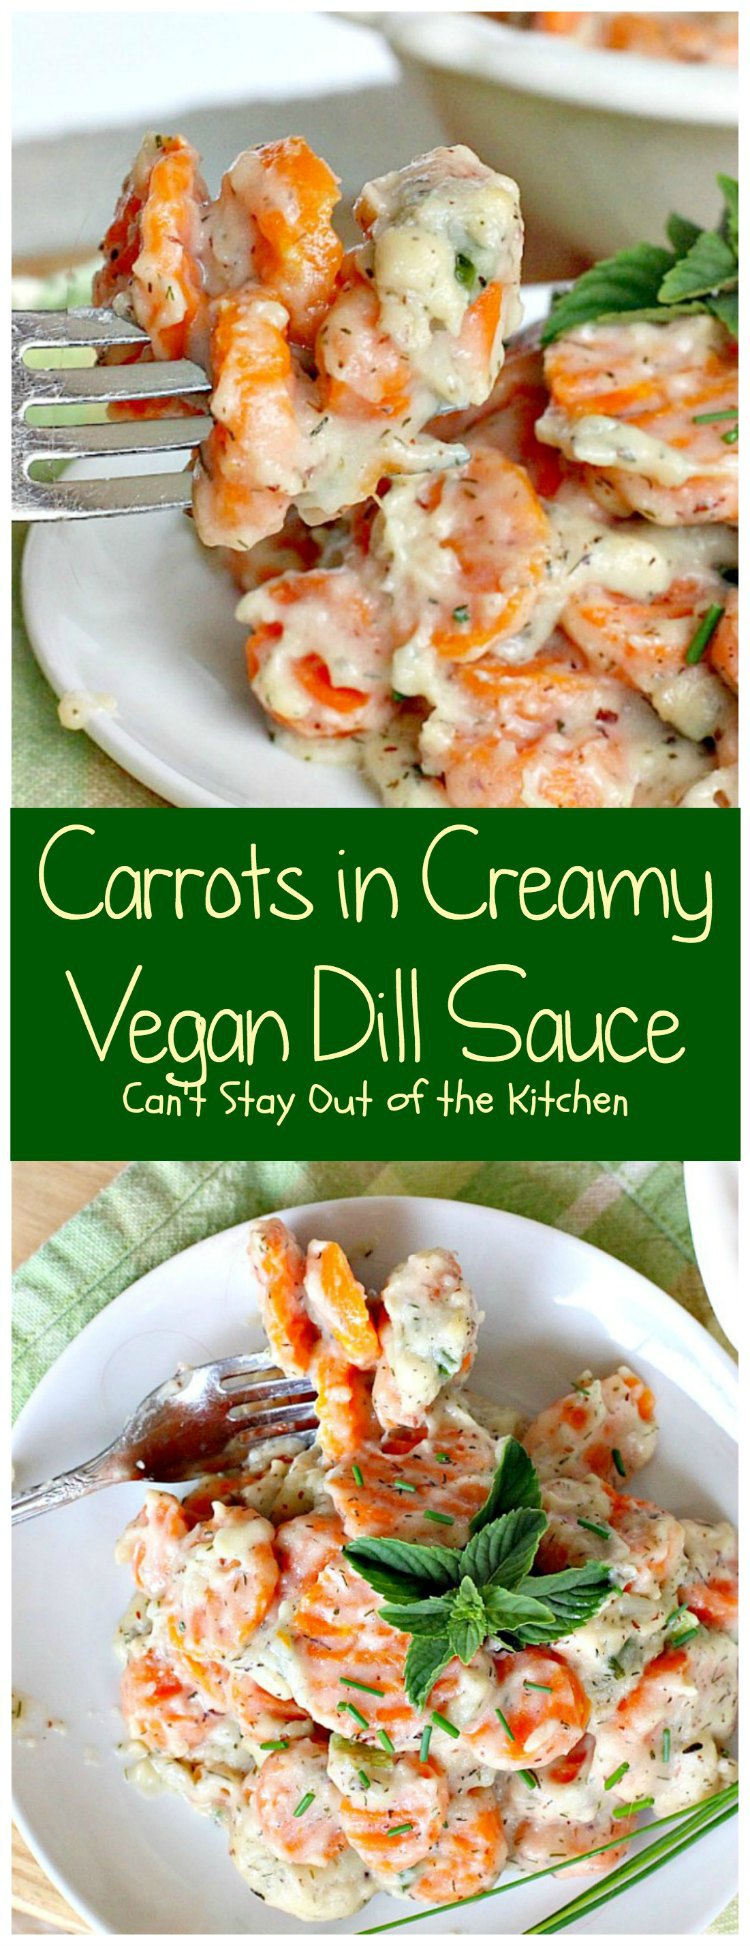 Carrots in Creamy Vegan Dill Sauce | Can't Stay Out of the Kitchen